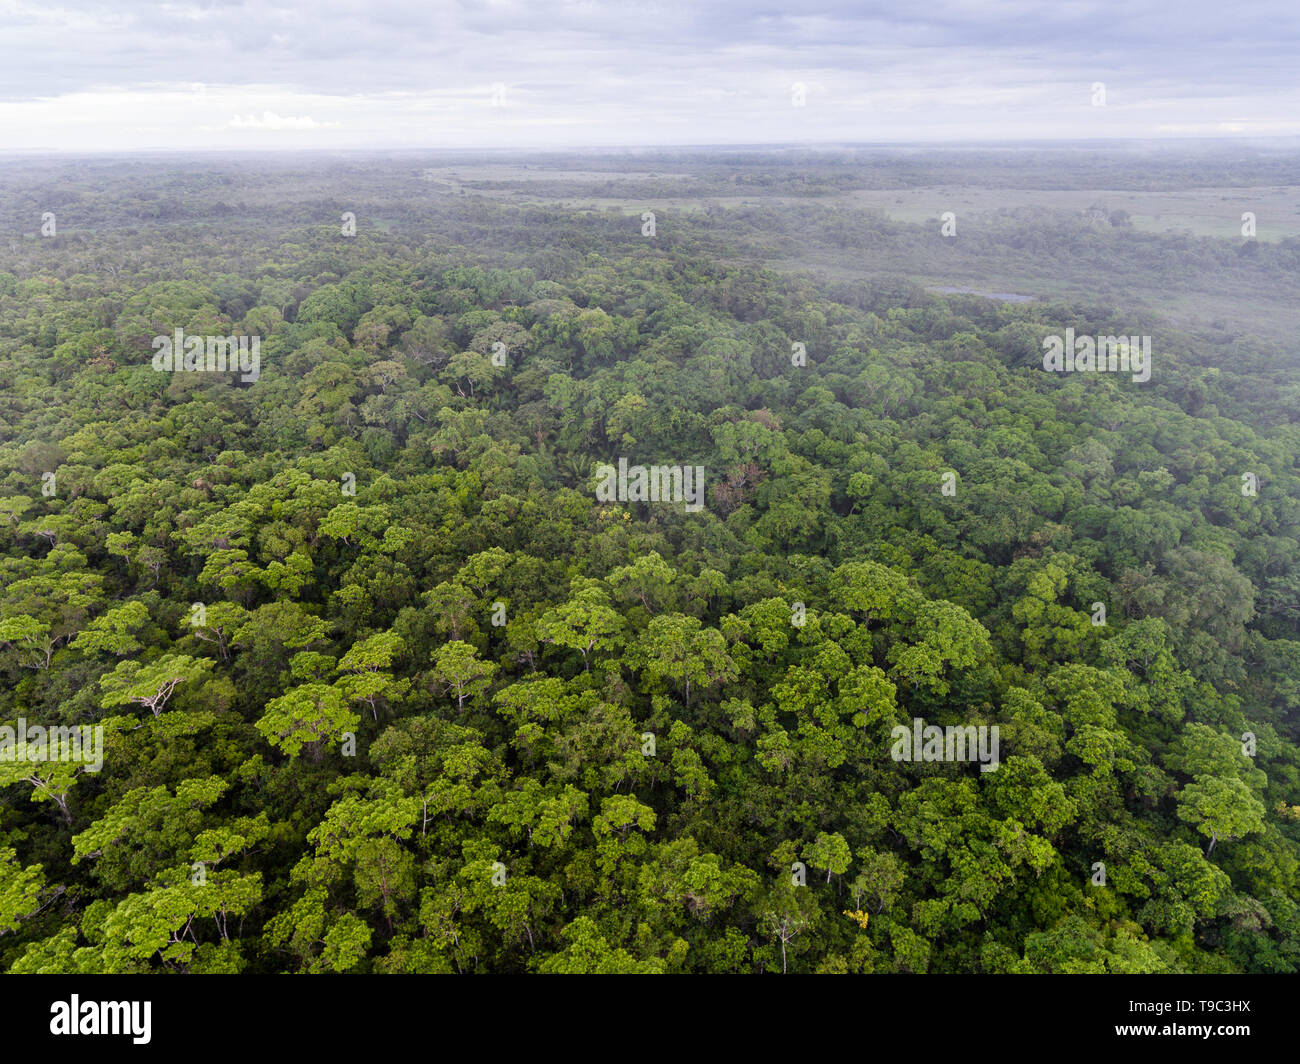 Aerial view of a forest in North Pantanal, Brazil Stock Photo